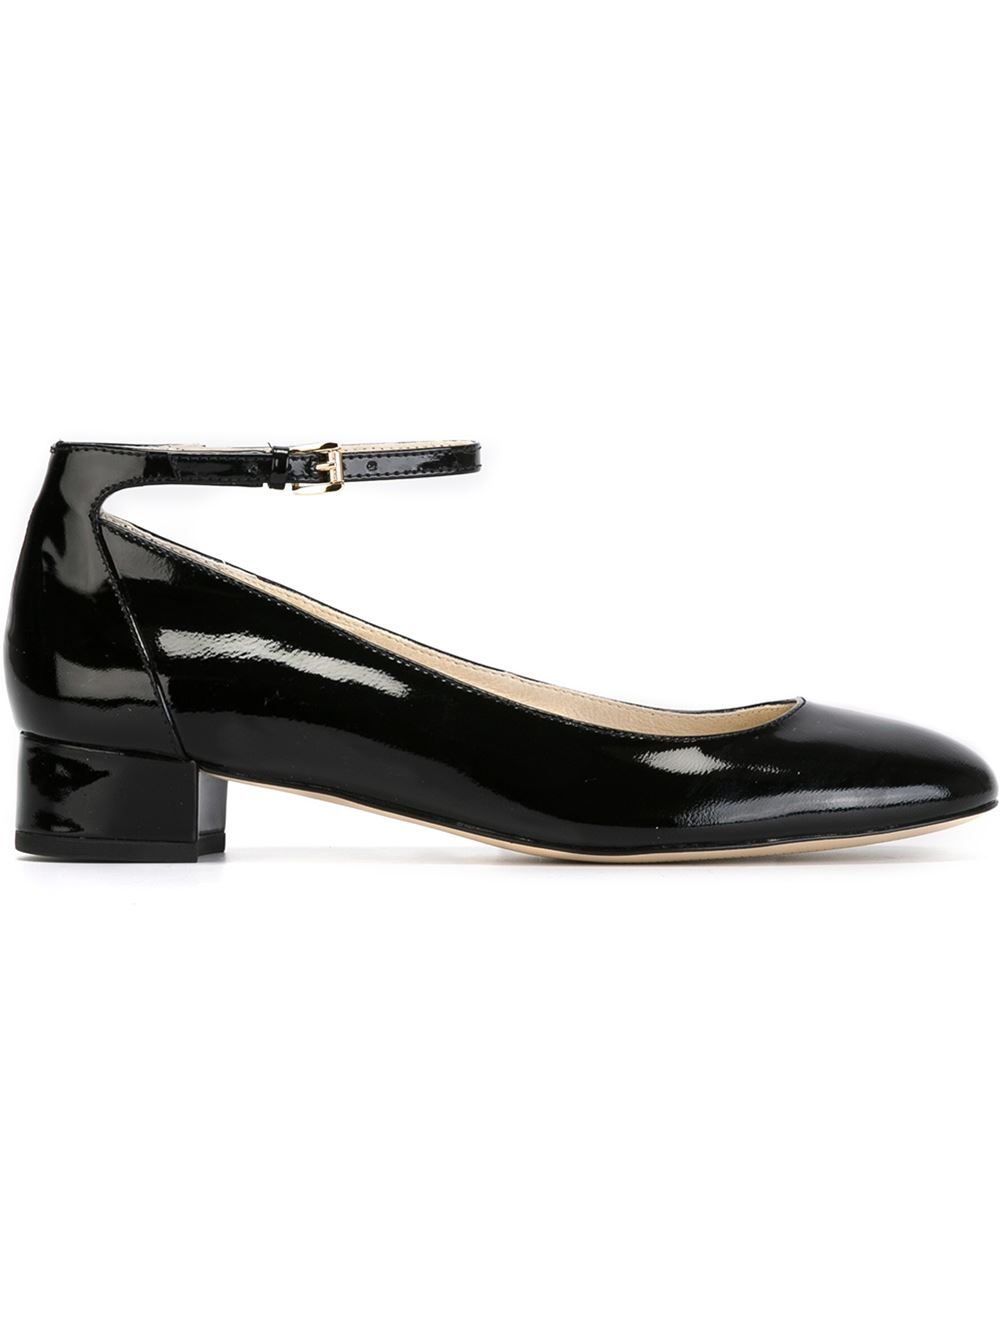 MICHAEL Michael Kors Ankle-Strap Patent-Leather Pumps in Black | Lyst